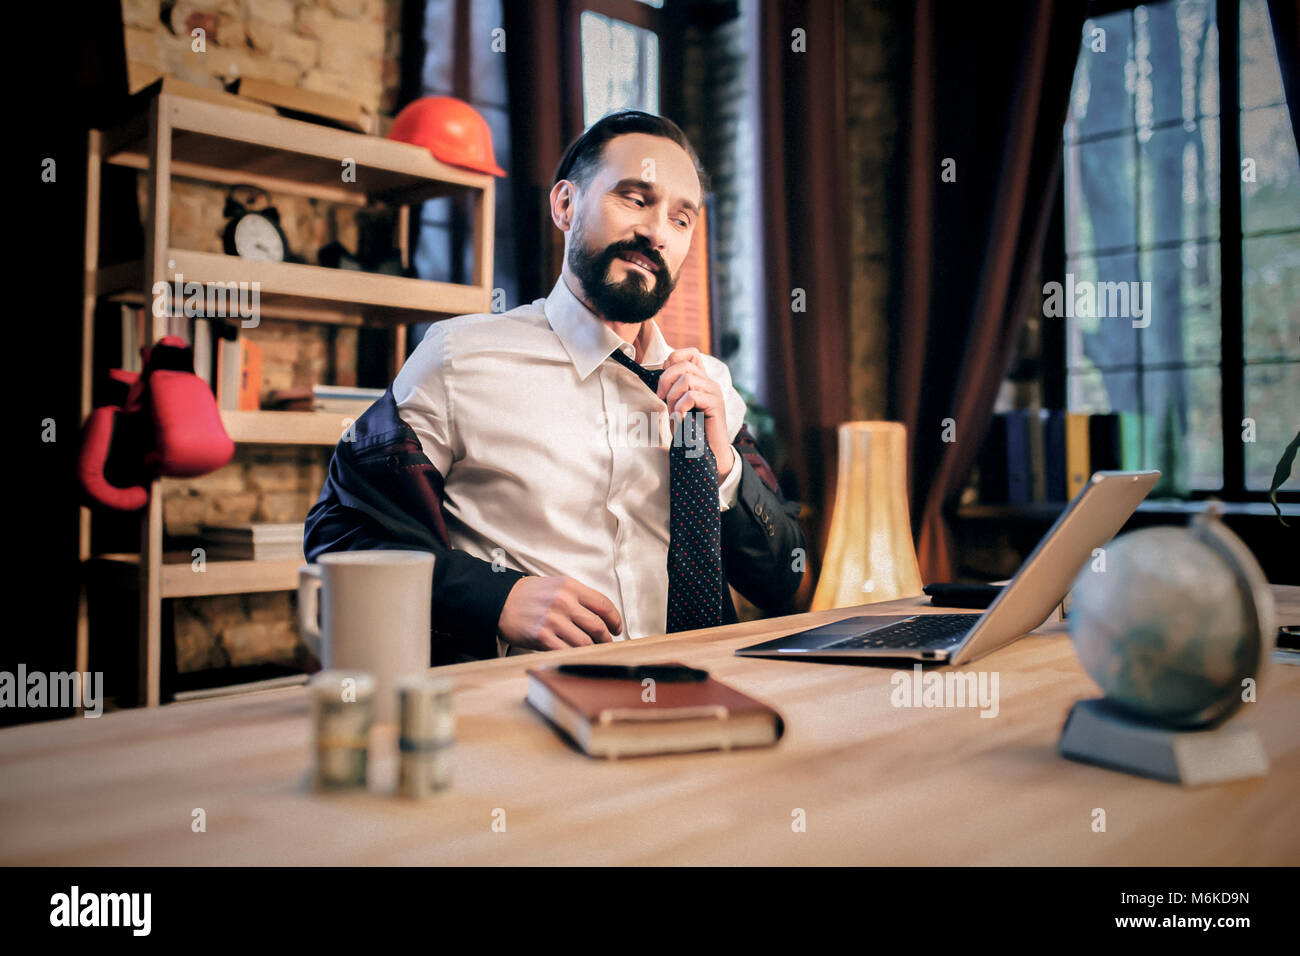 businessman in a strange position Stock Photo